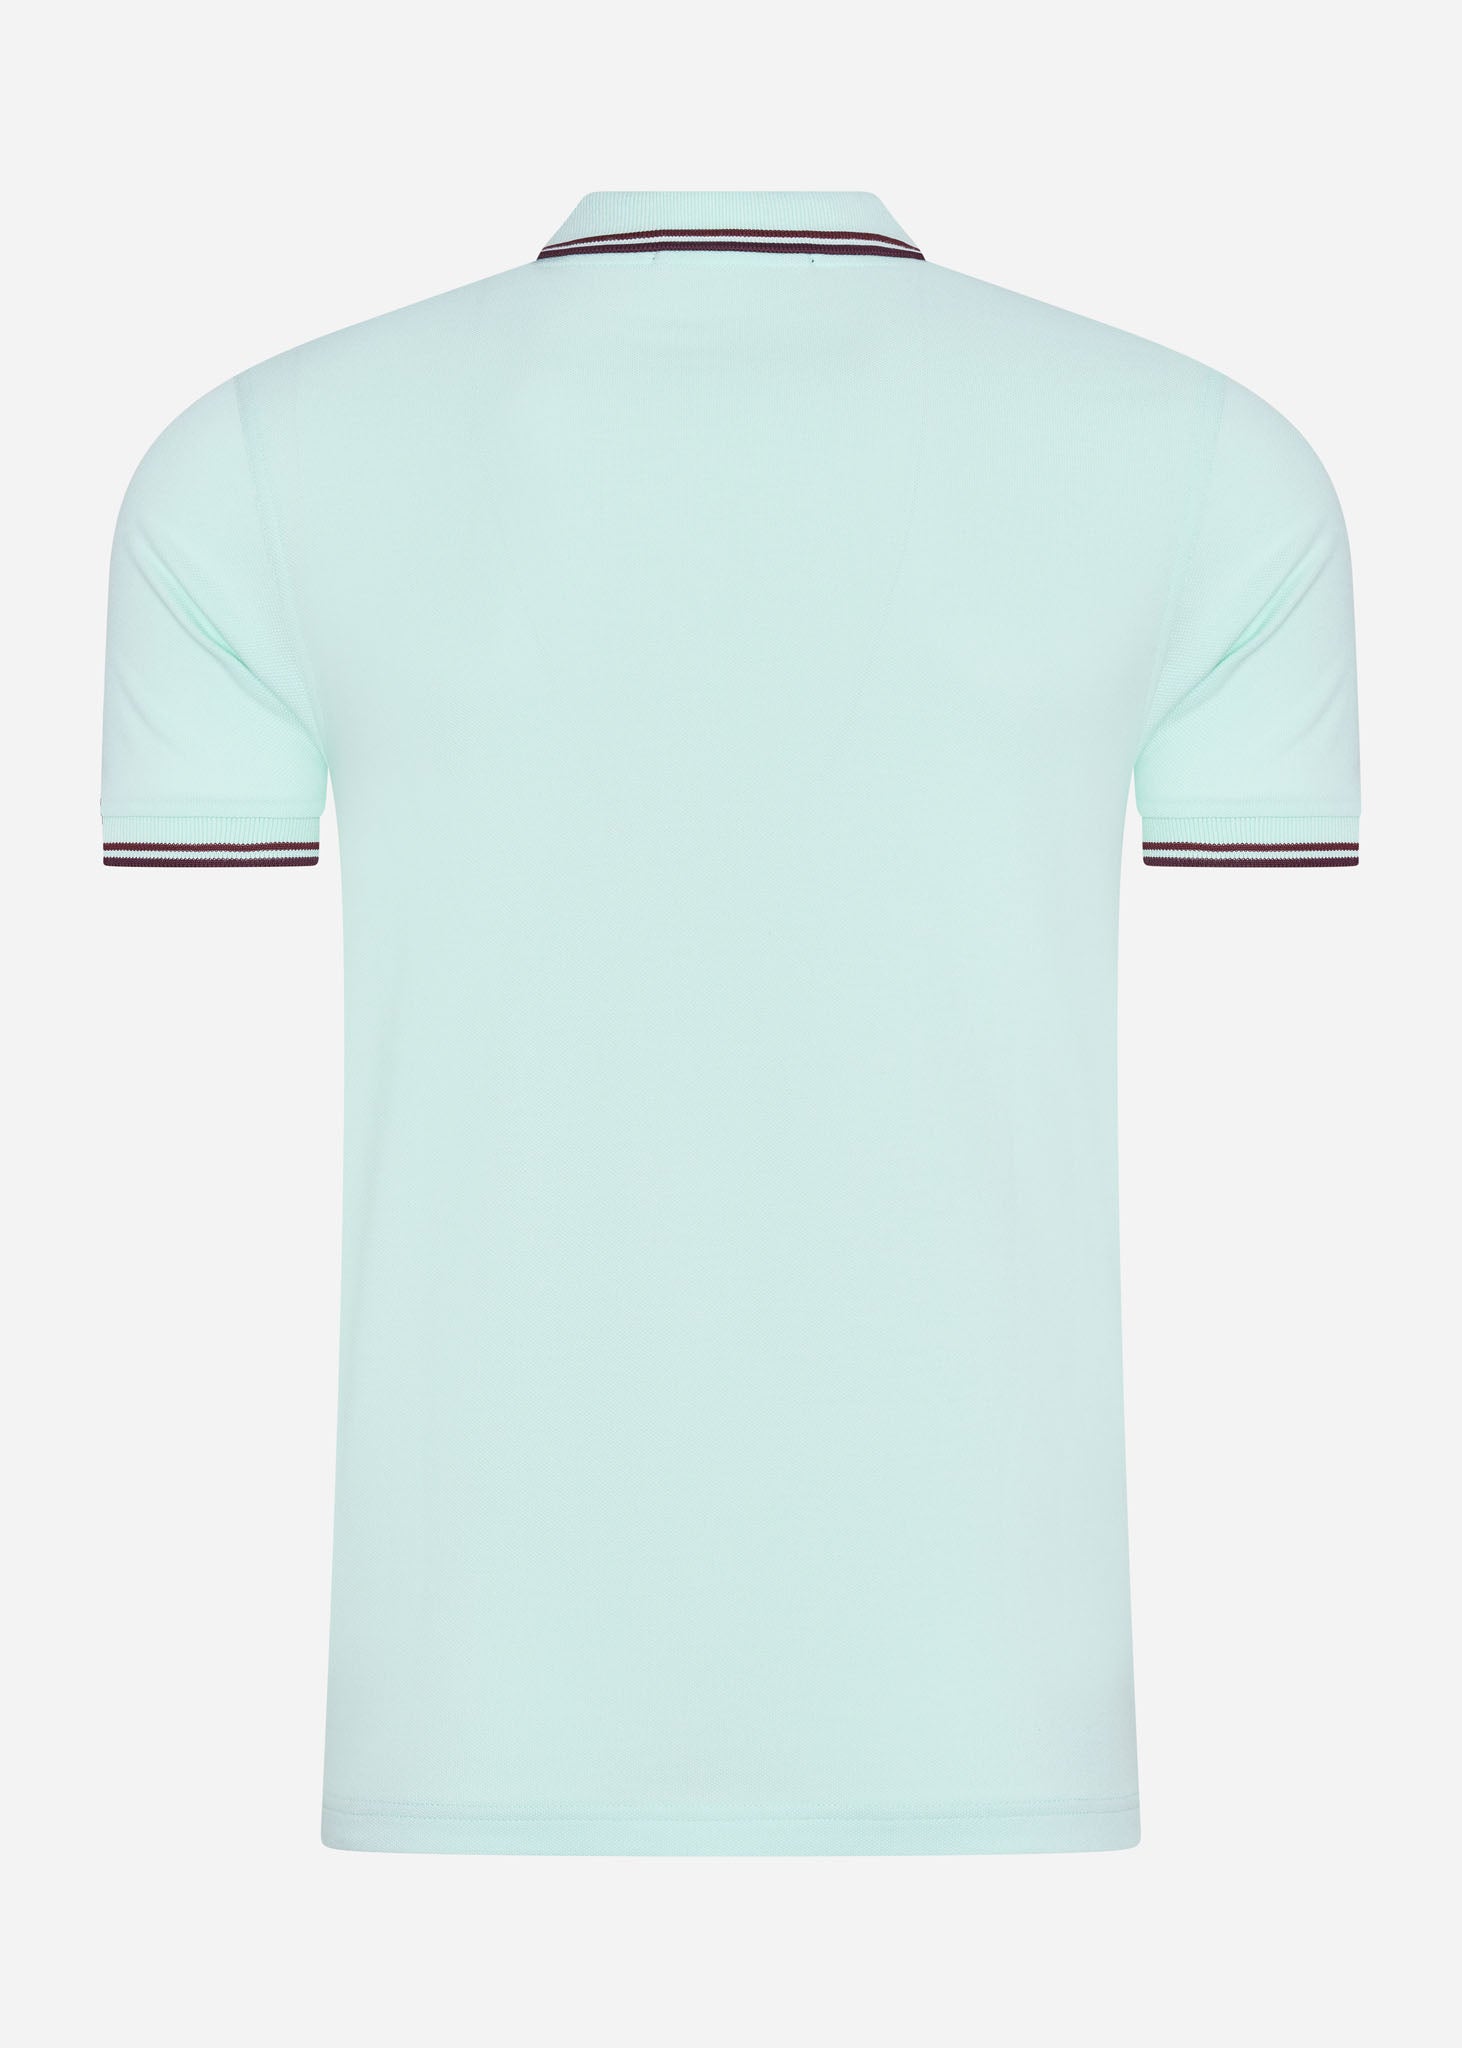 Fred Perry Polo's  Twin tipped fred perry shirt - brighton blue aubergine mahogany 